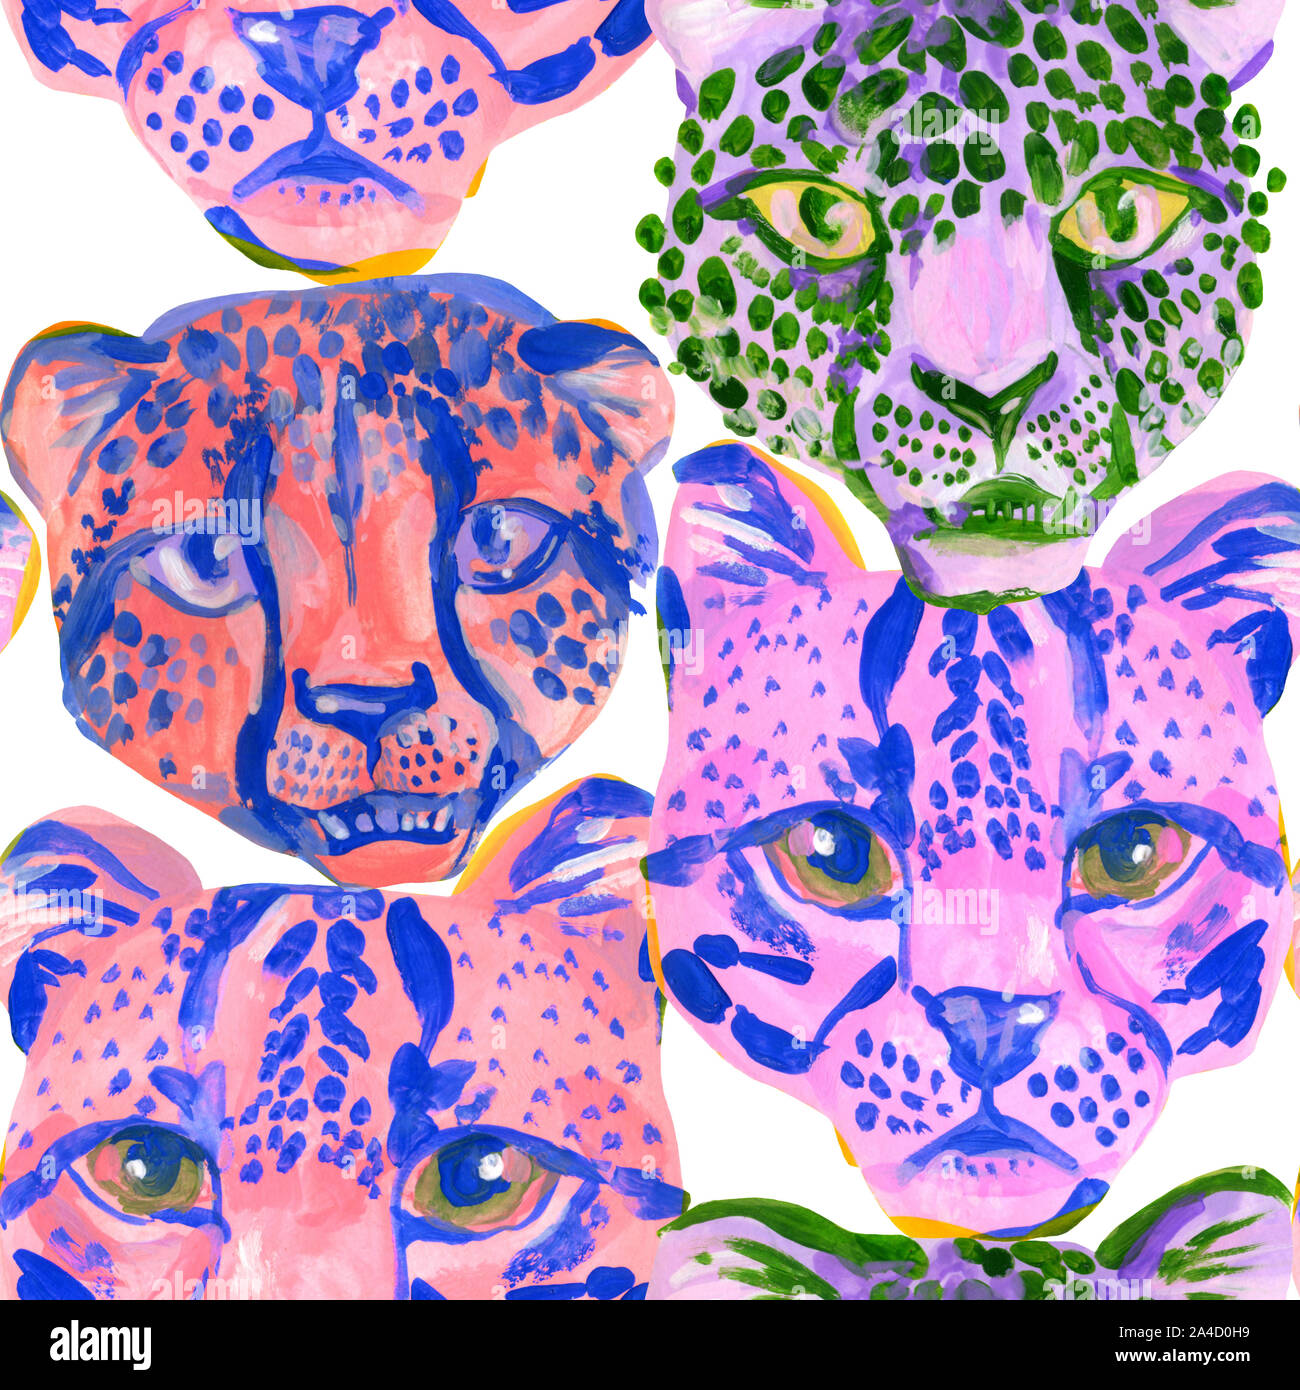 Watercolor animal print pattern. Cute leopard, cheetah, jaguar muzzles graphic background. Creative watercolor illustration with exotic wild animal in Stock Photo